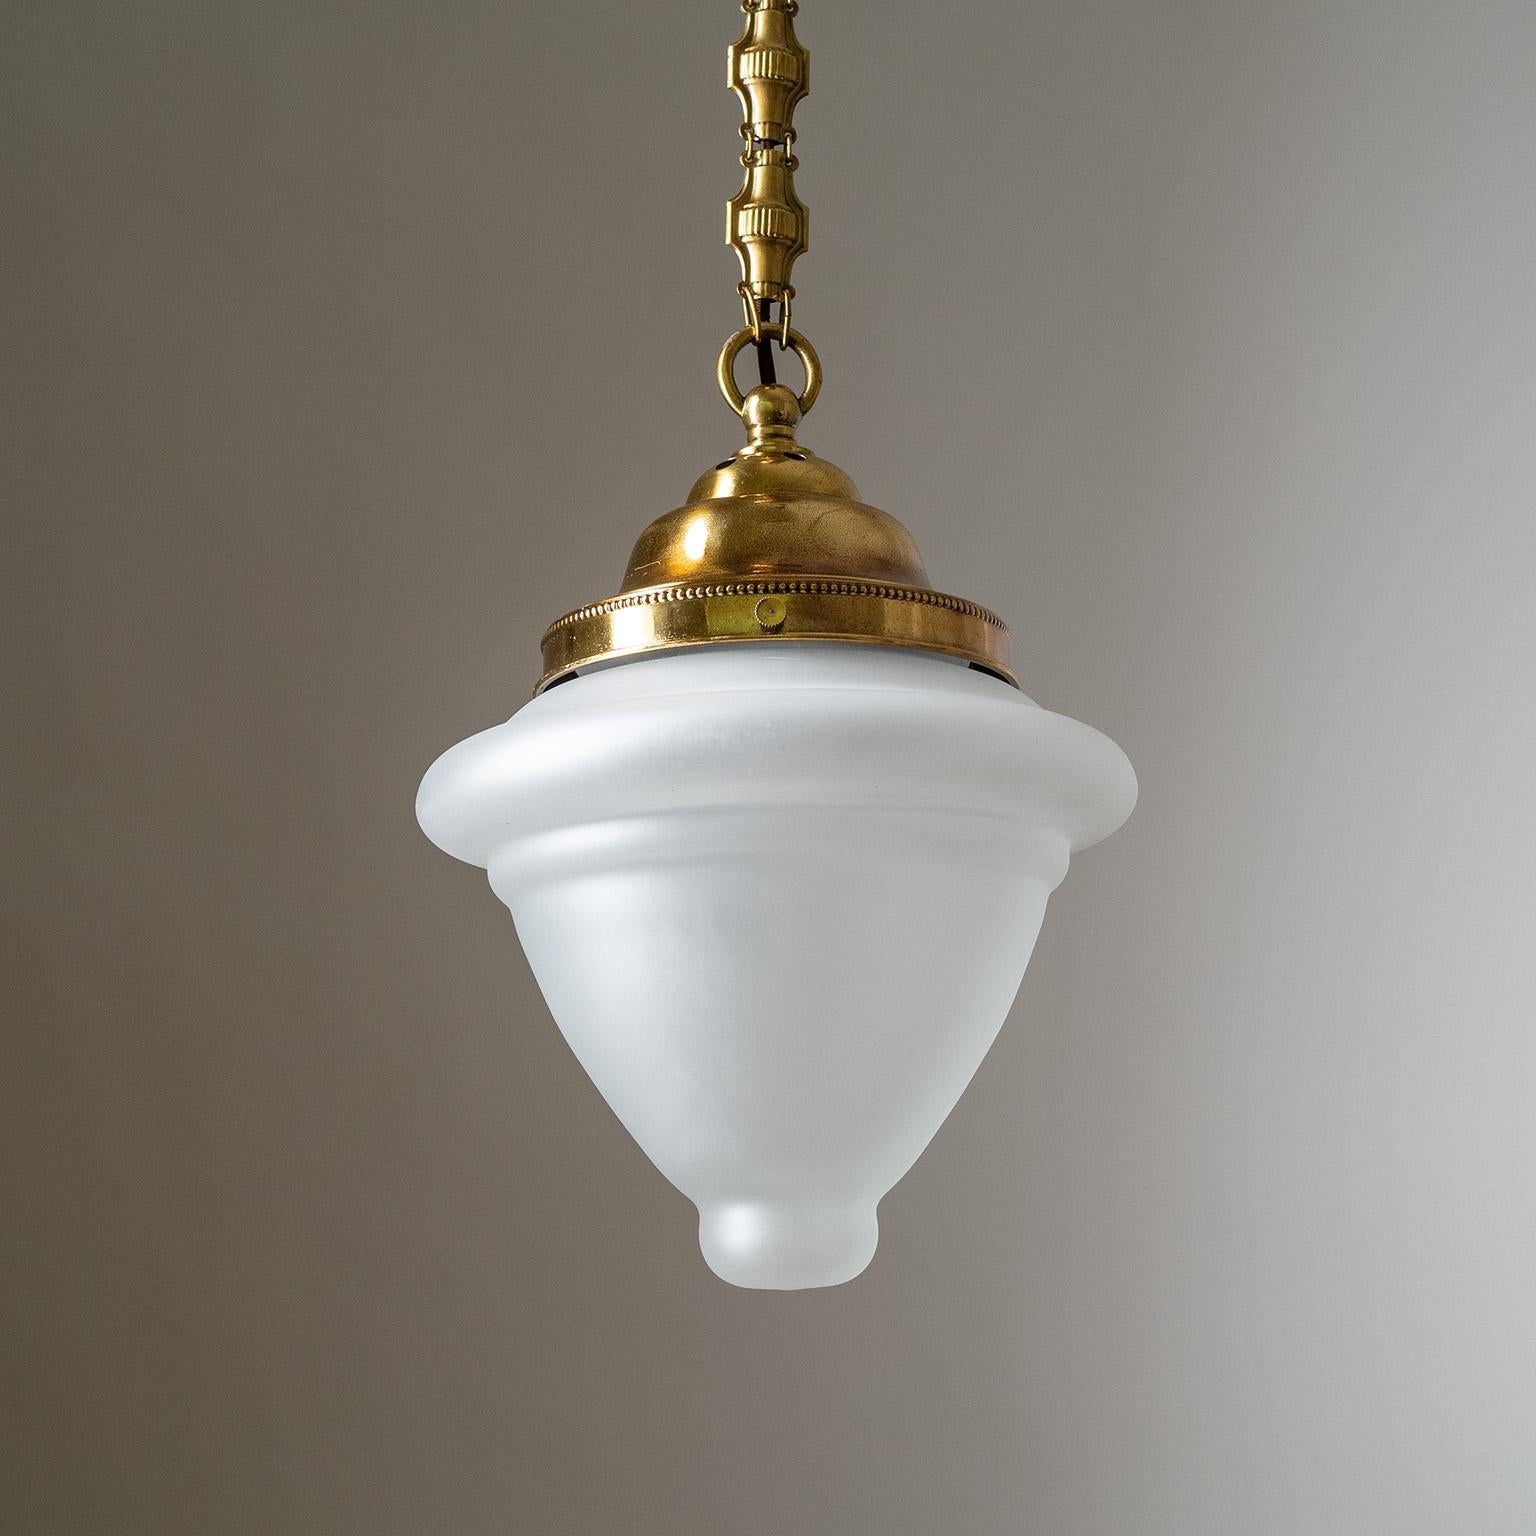 Brass Pendant With Satin Glass, 1920s For Sale 2